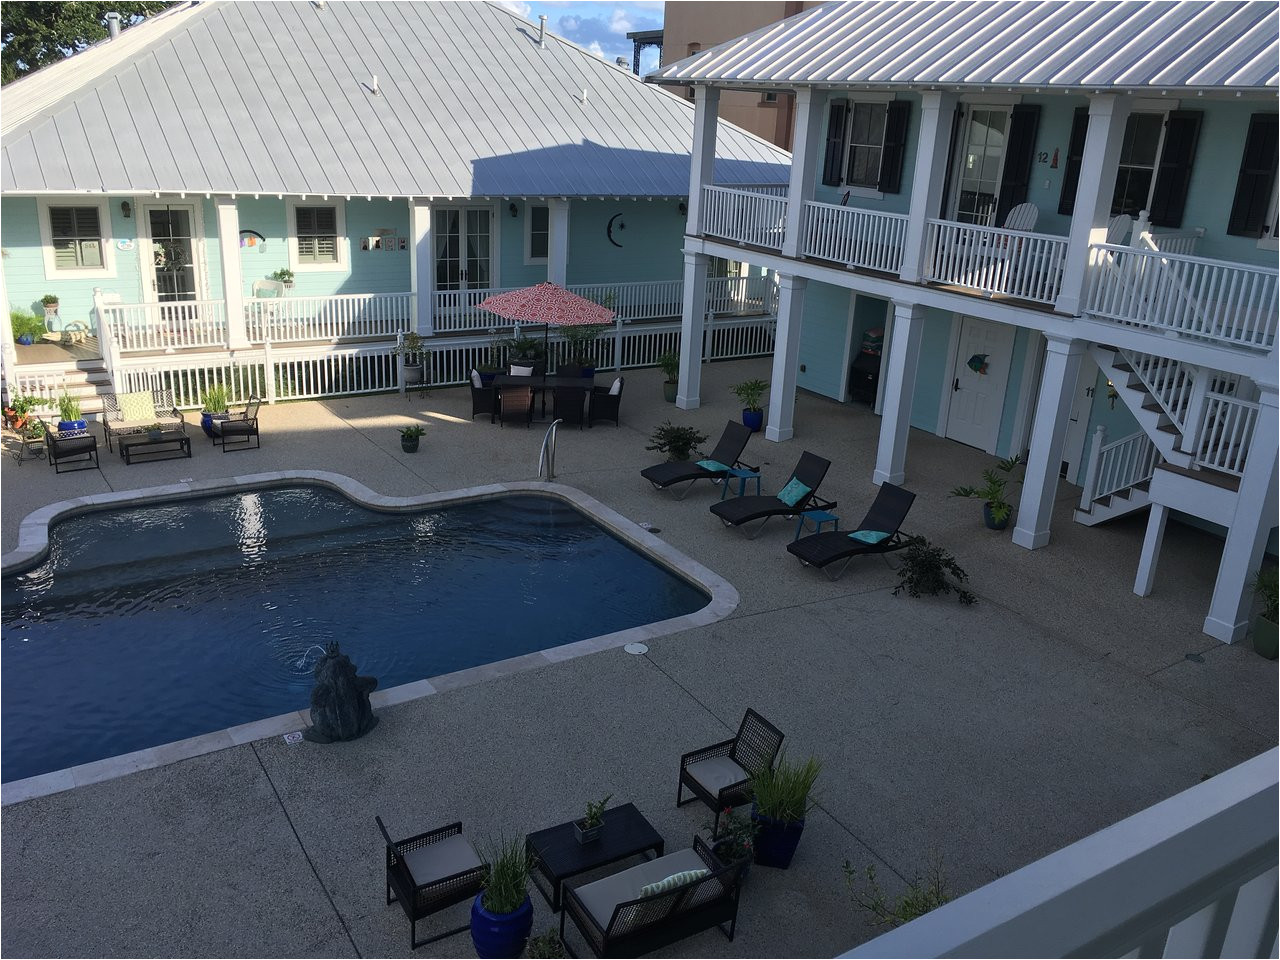 Homes for Sale In Bay St Louis Ms with A Pool Bay town Inn Bed Breakfast Bay Saint Louis Ms B B Reviews